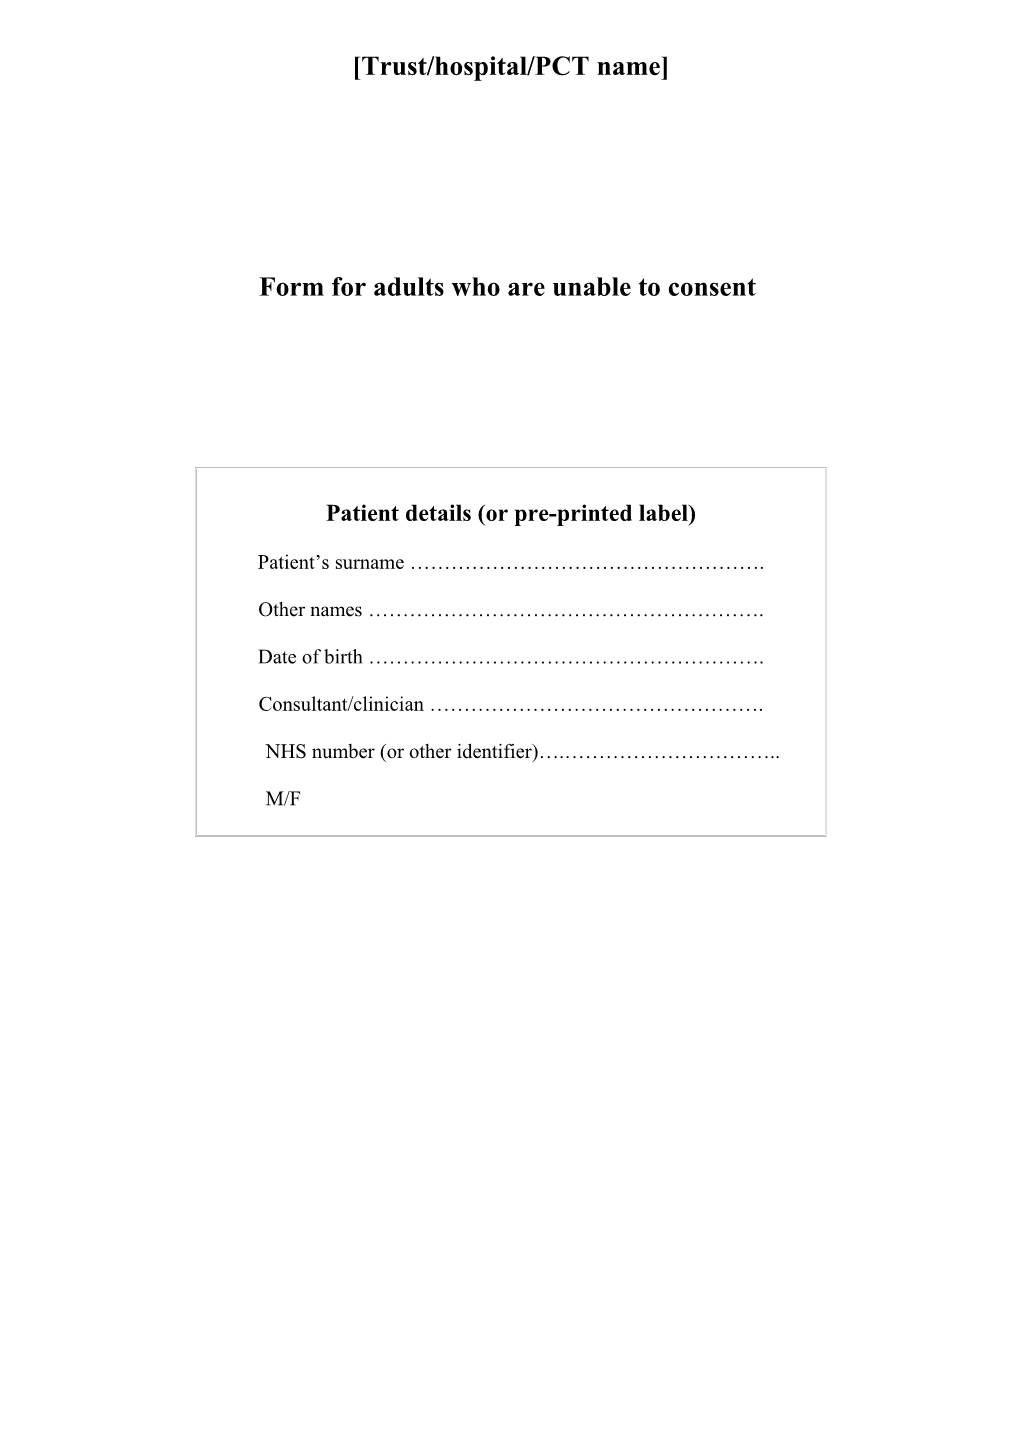 Adults Unable to Consent Form